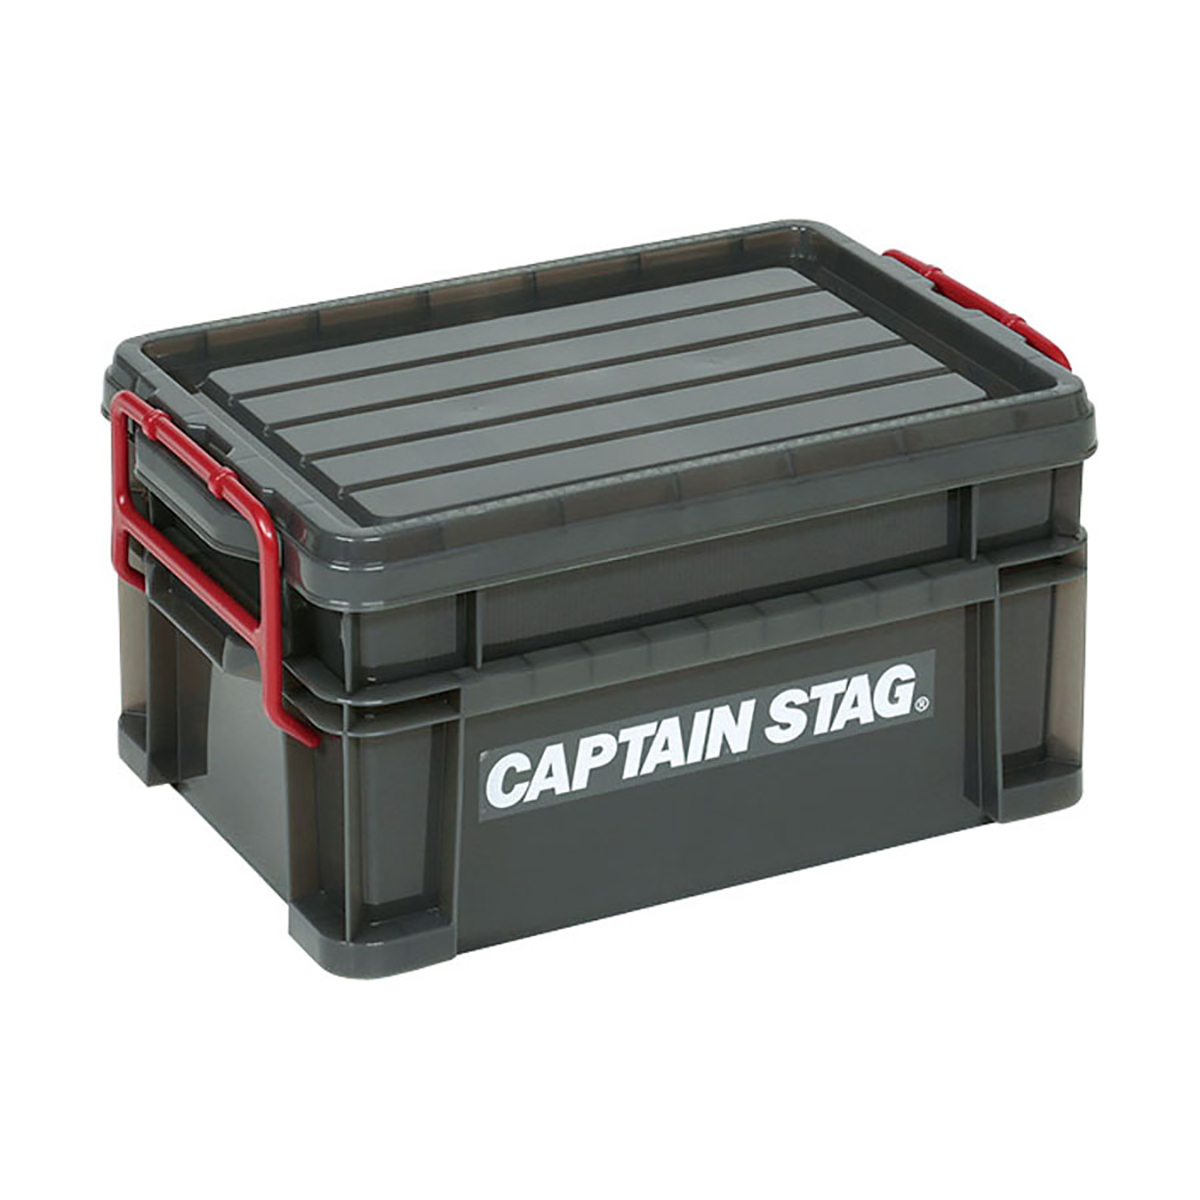 CAPTAIN STAG OUTDOOR TOOLBOX S